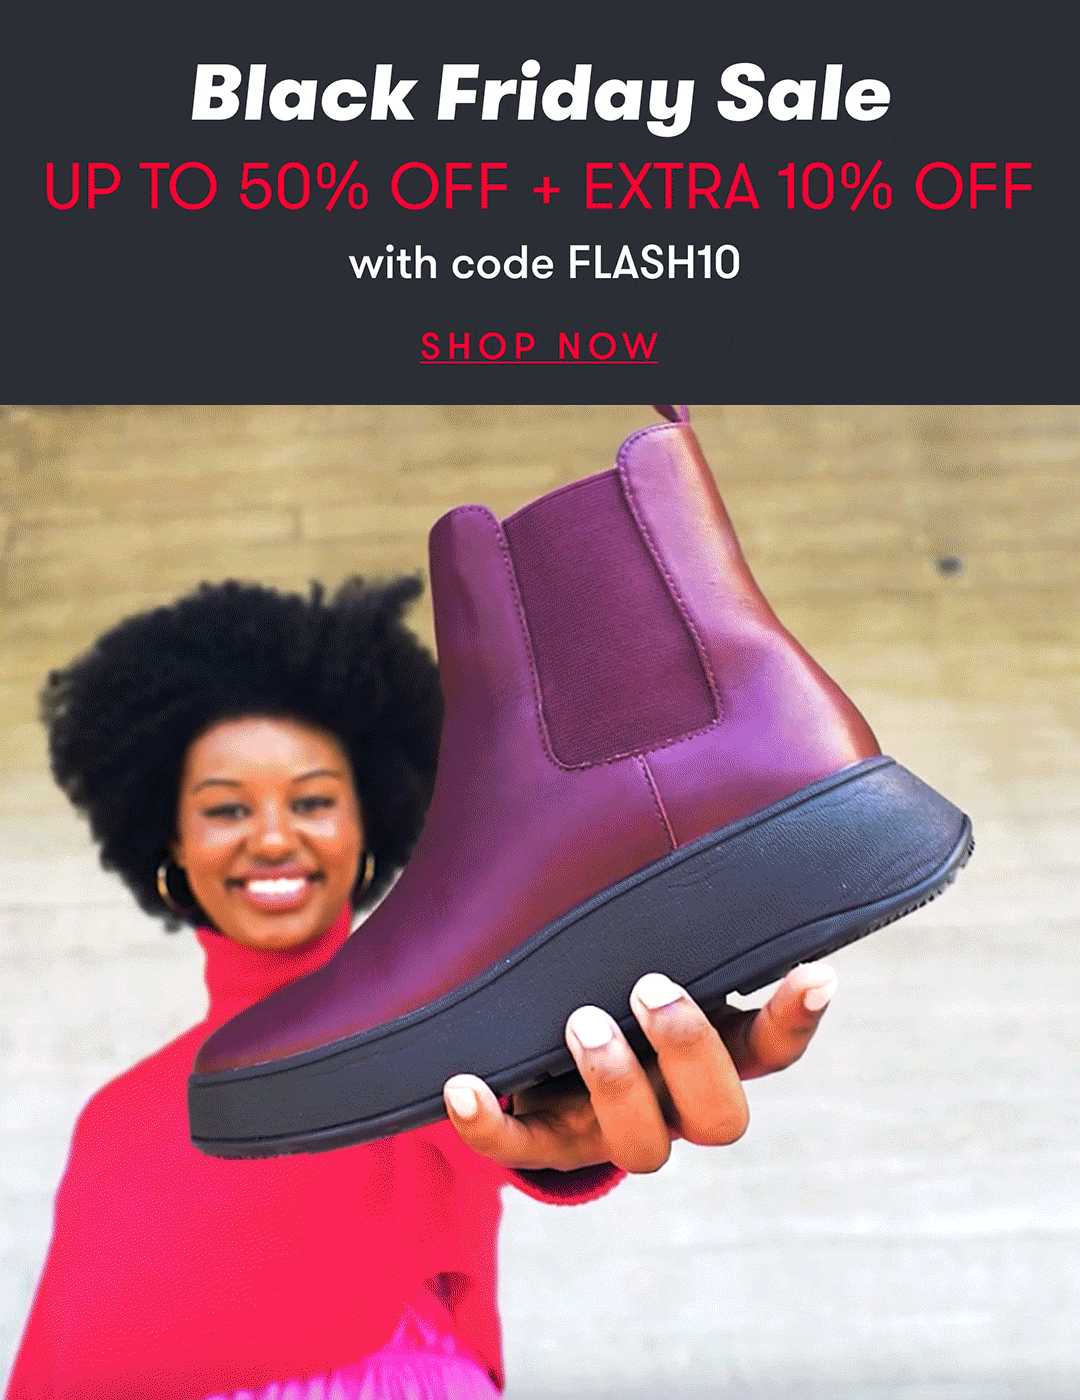 Black friday sale. Up to 50% off + extra 10% off with code FLASH10. Shop now